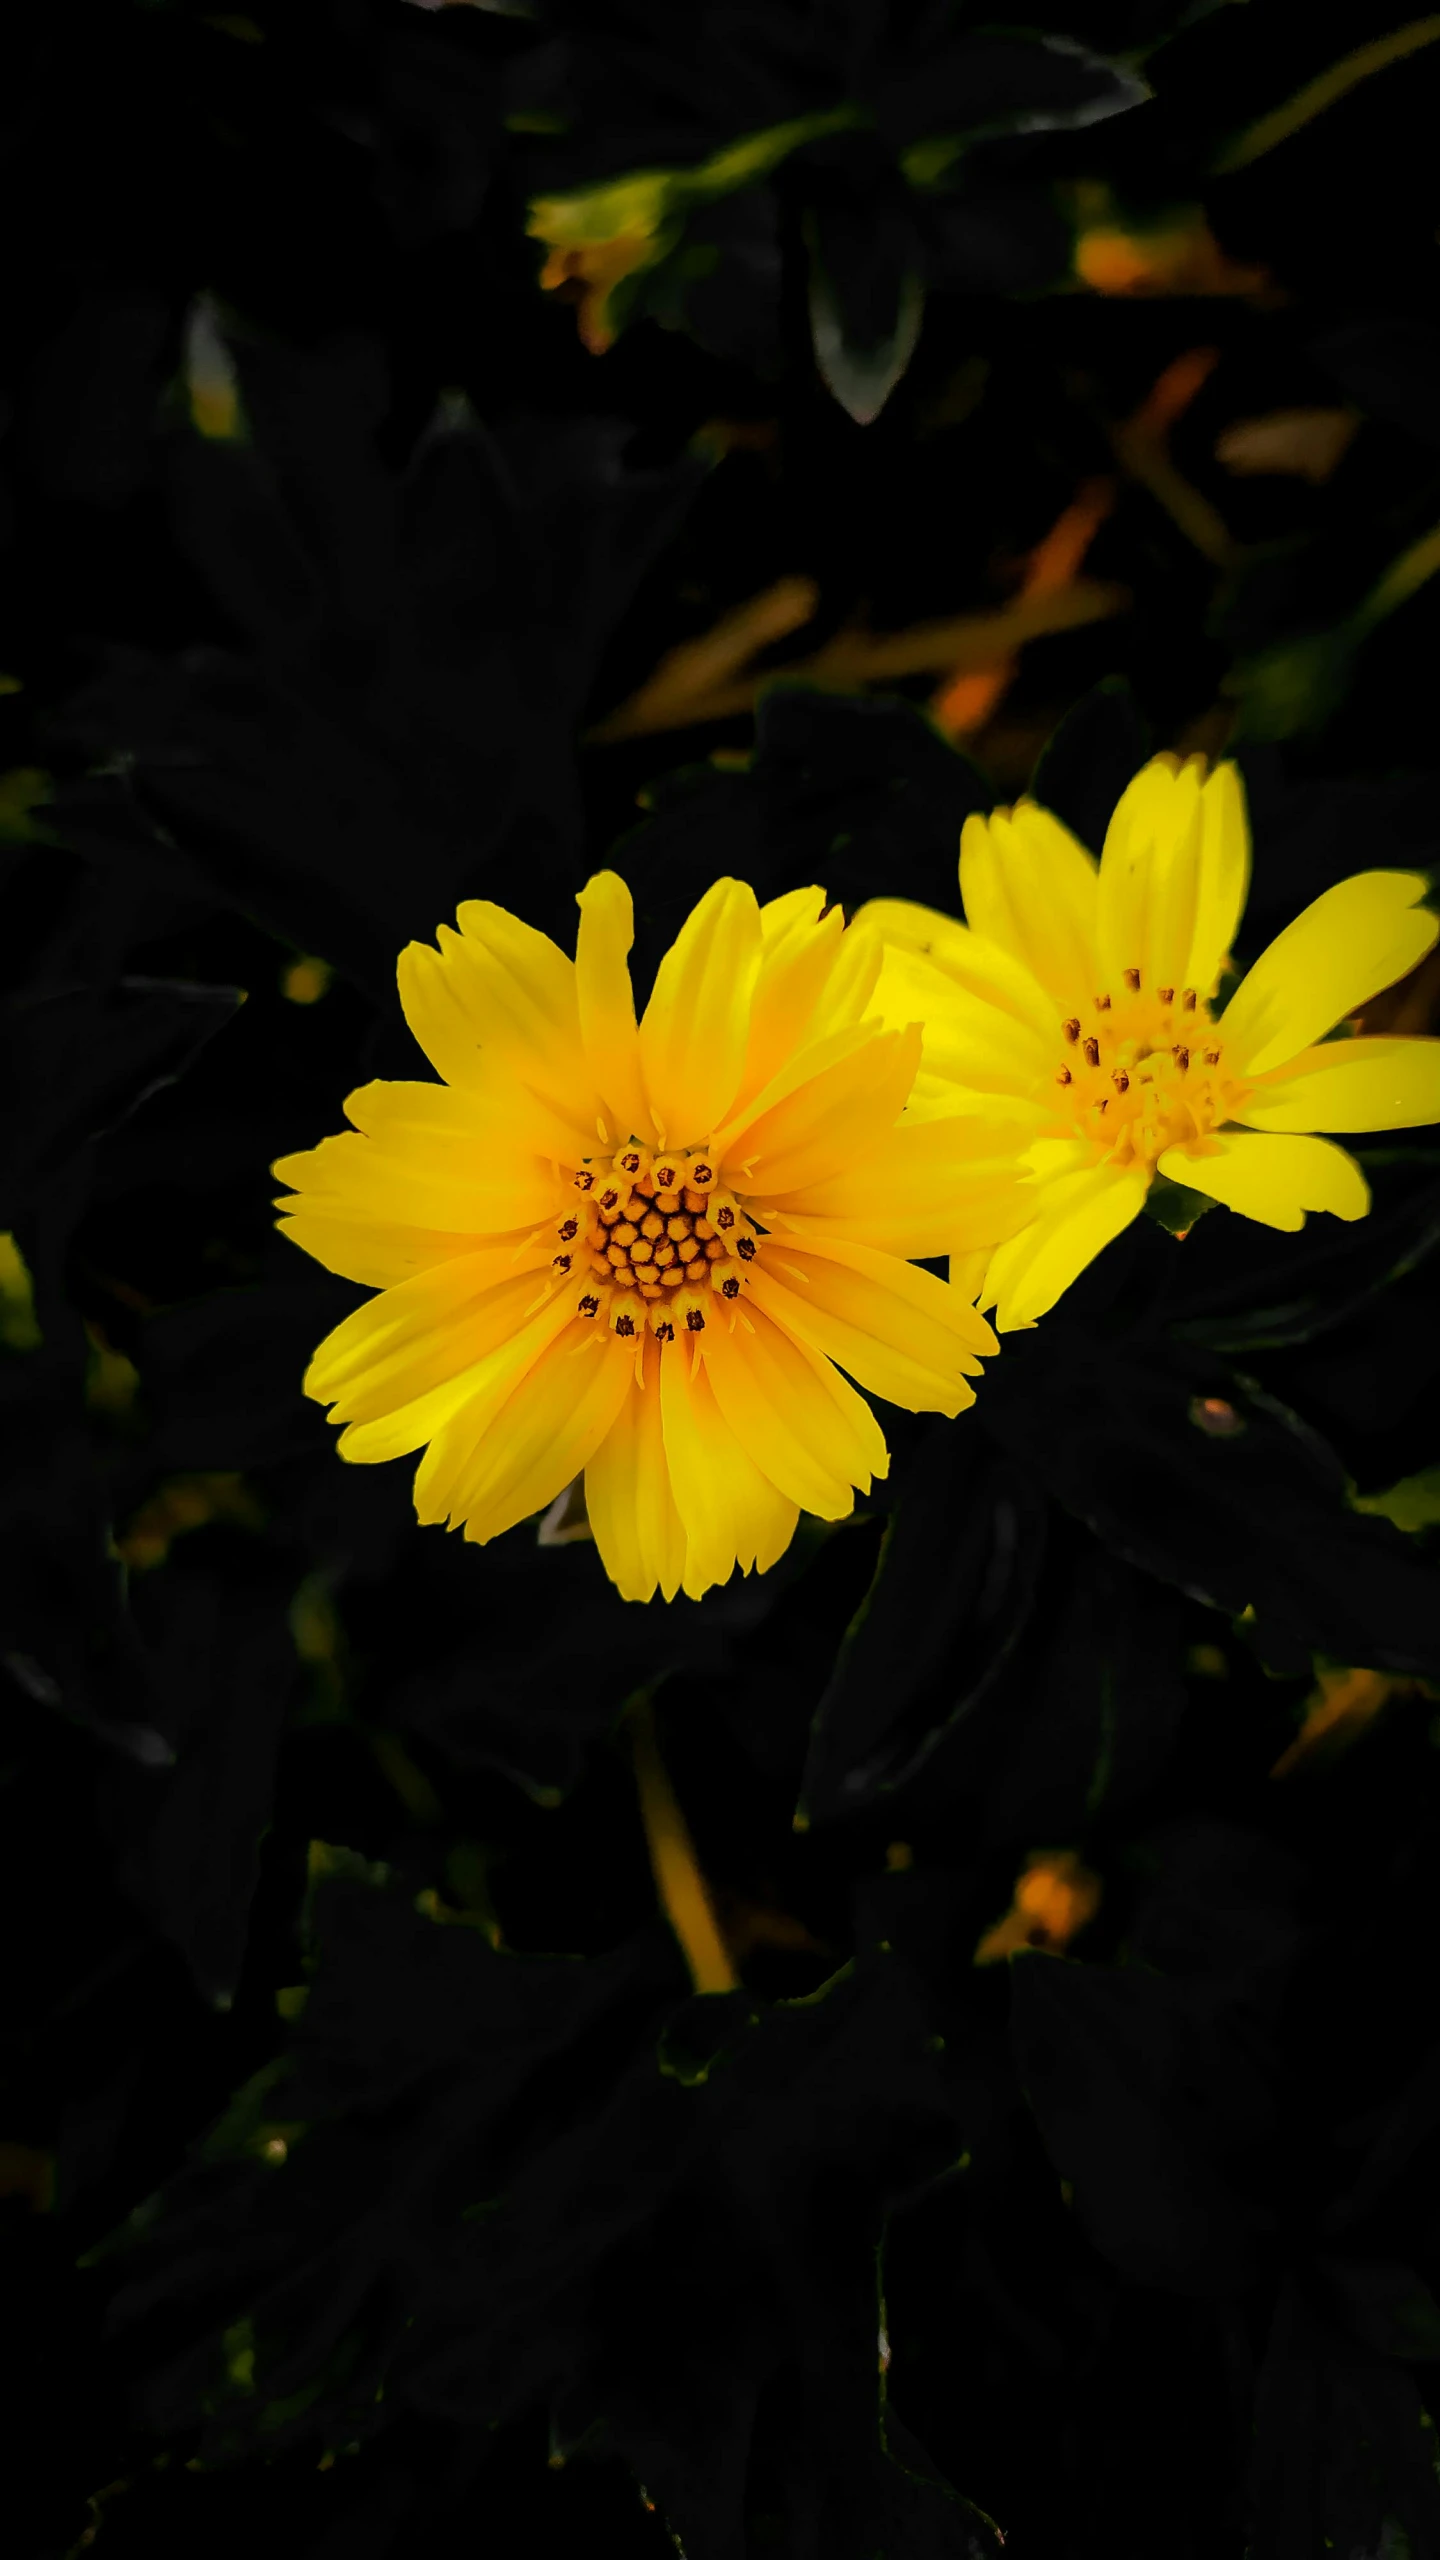 two large flowers are sitting together in the dark